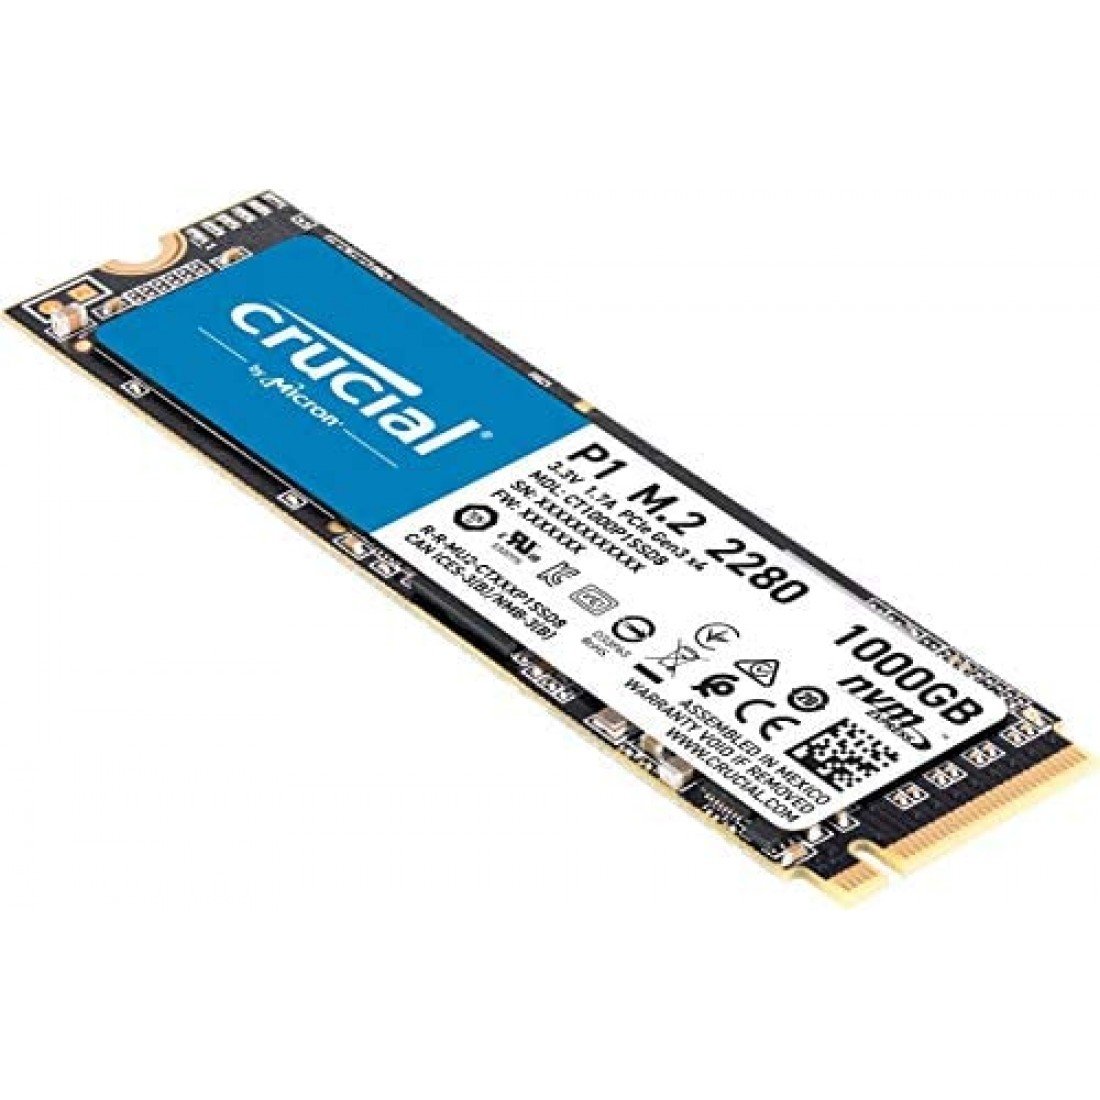 Crucial BX500 CT240BX500SSD1 240GB SATA 2.5 inch Internal Solid State